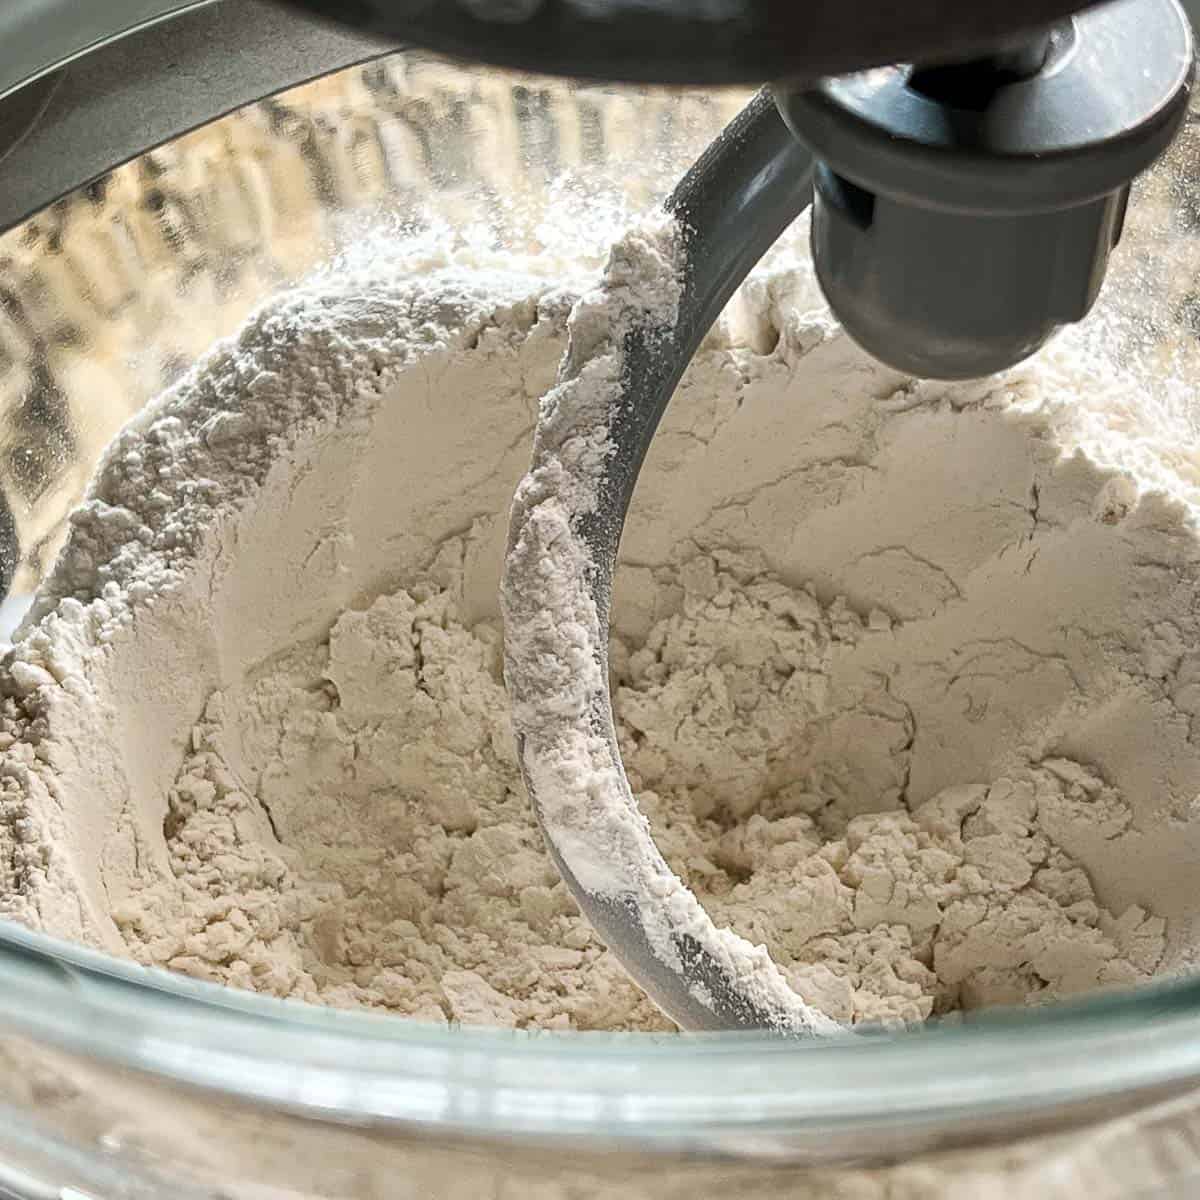 Image showing dough being brought together by dough hook in stand mixer.